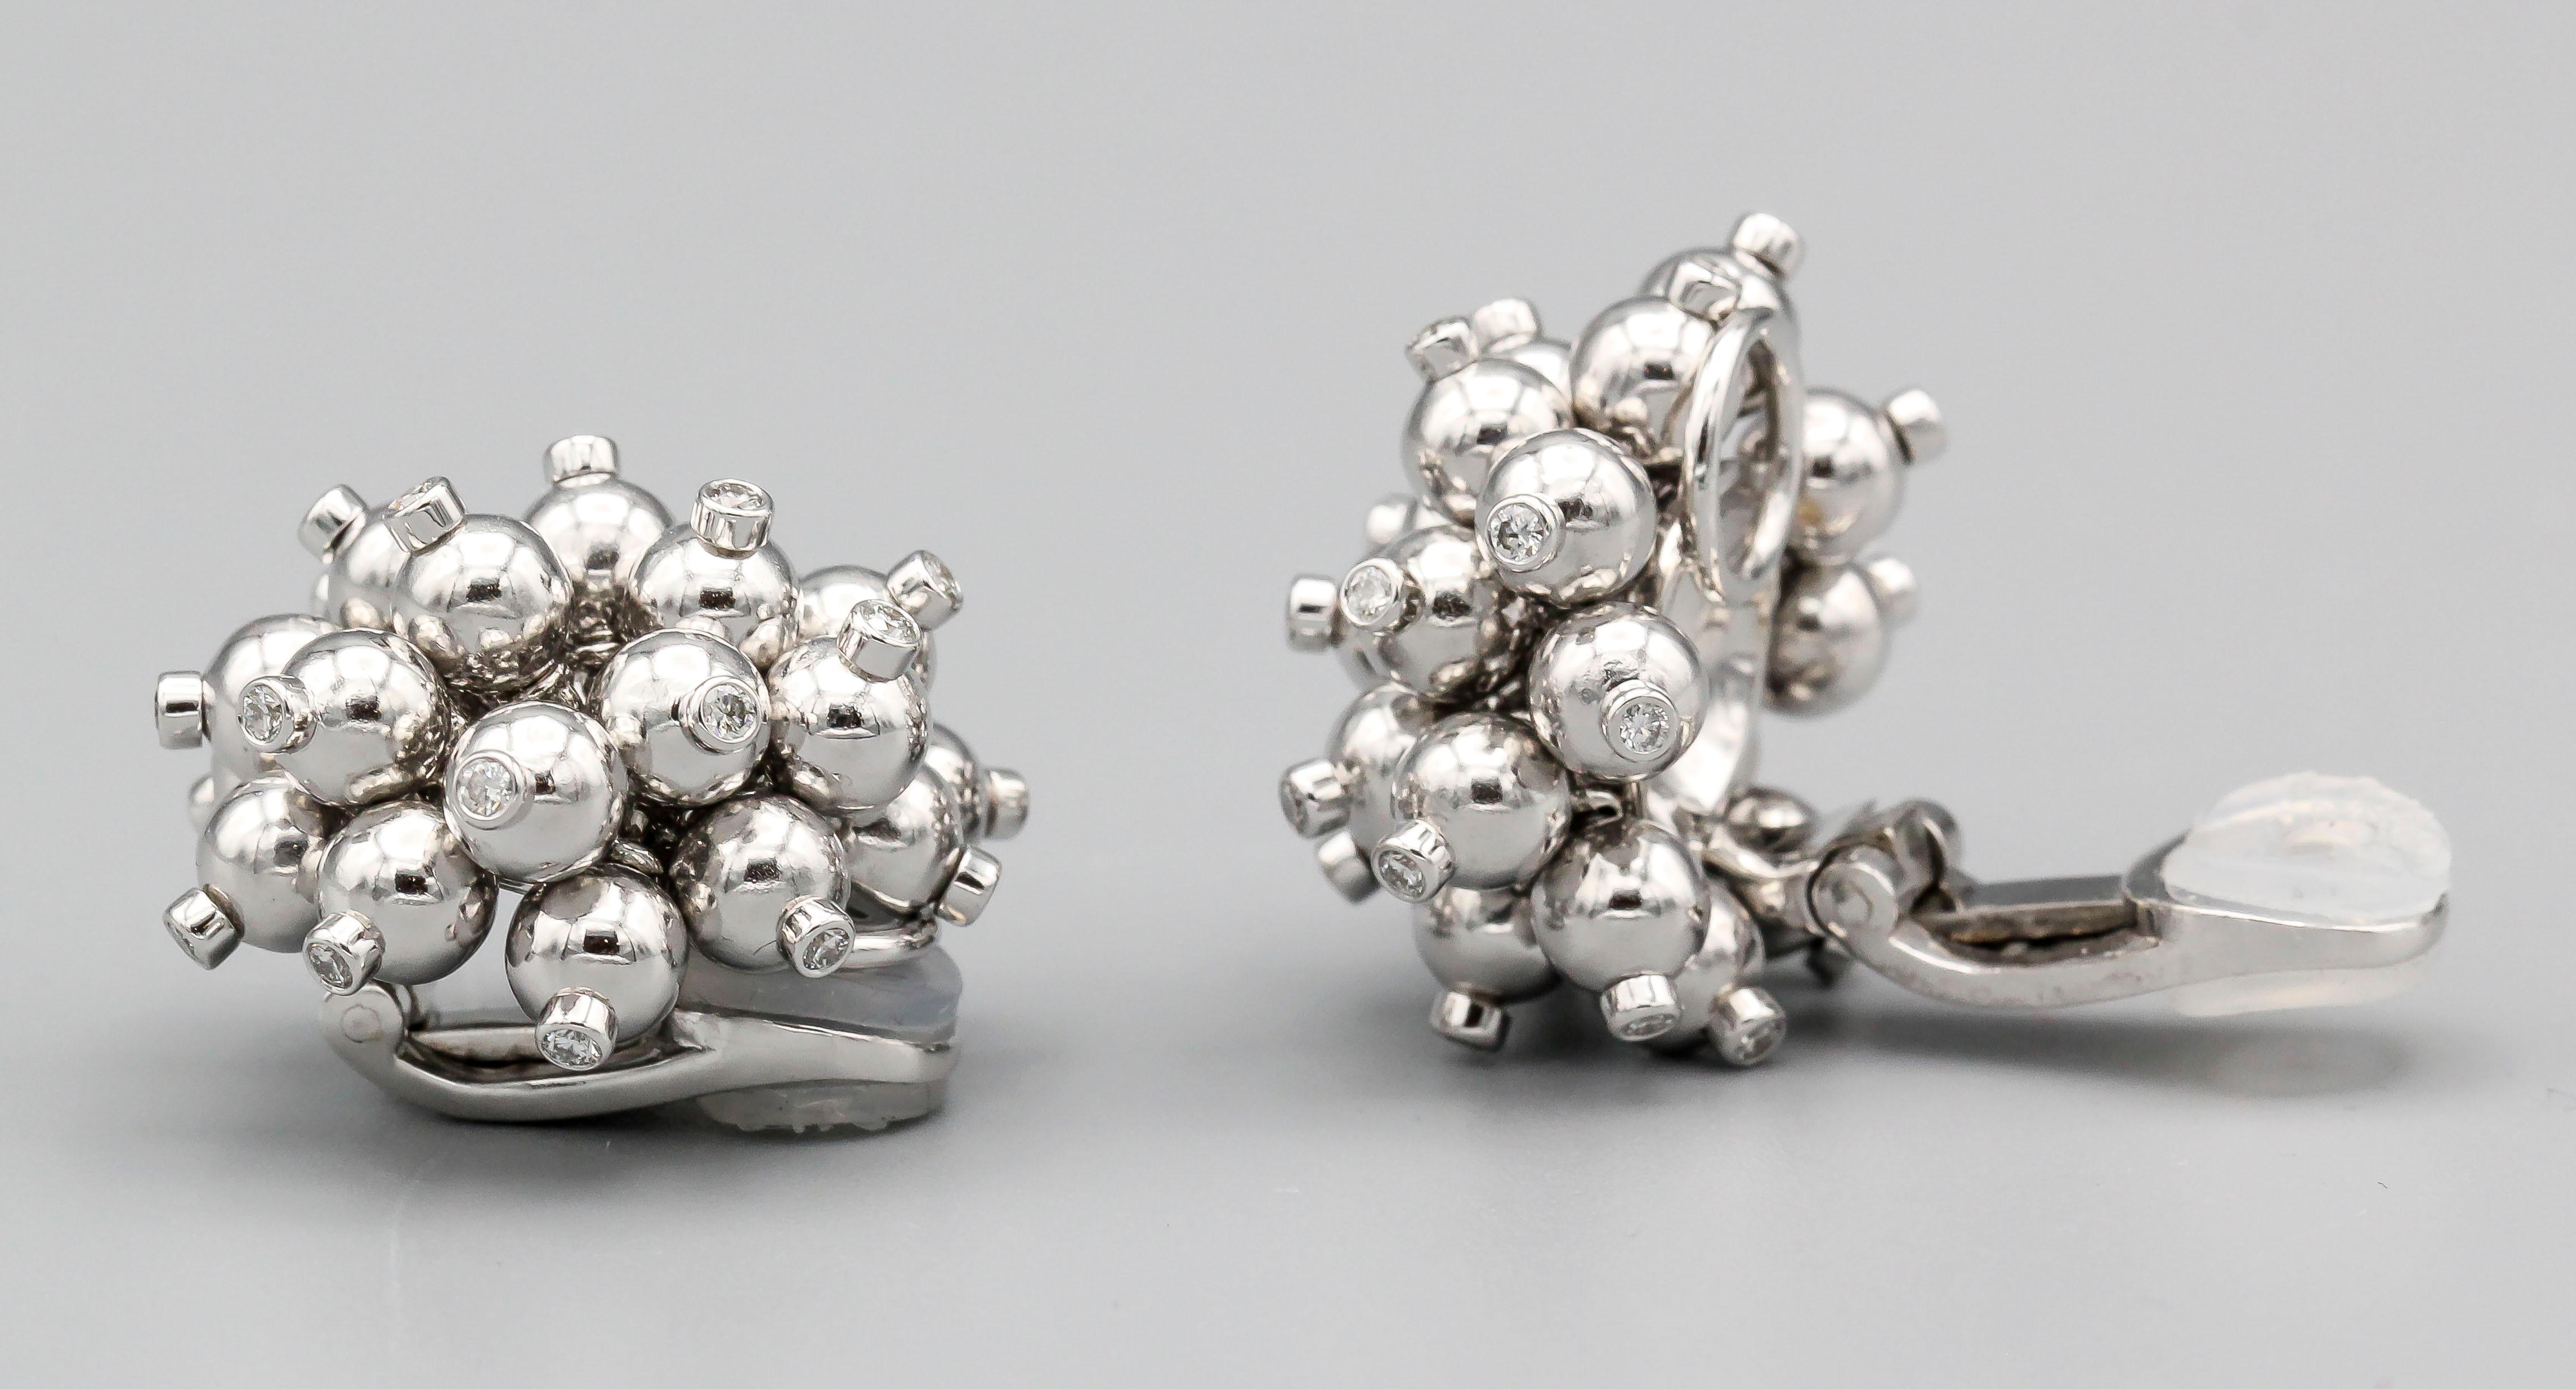 Fine pair of diamond and 18k white gold earrings from Aletto Brothers.  The earrings are known as the 